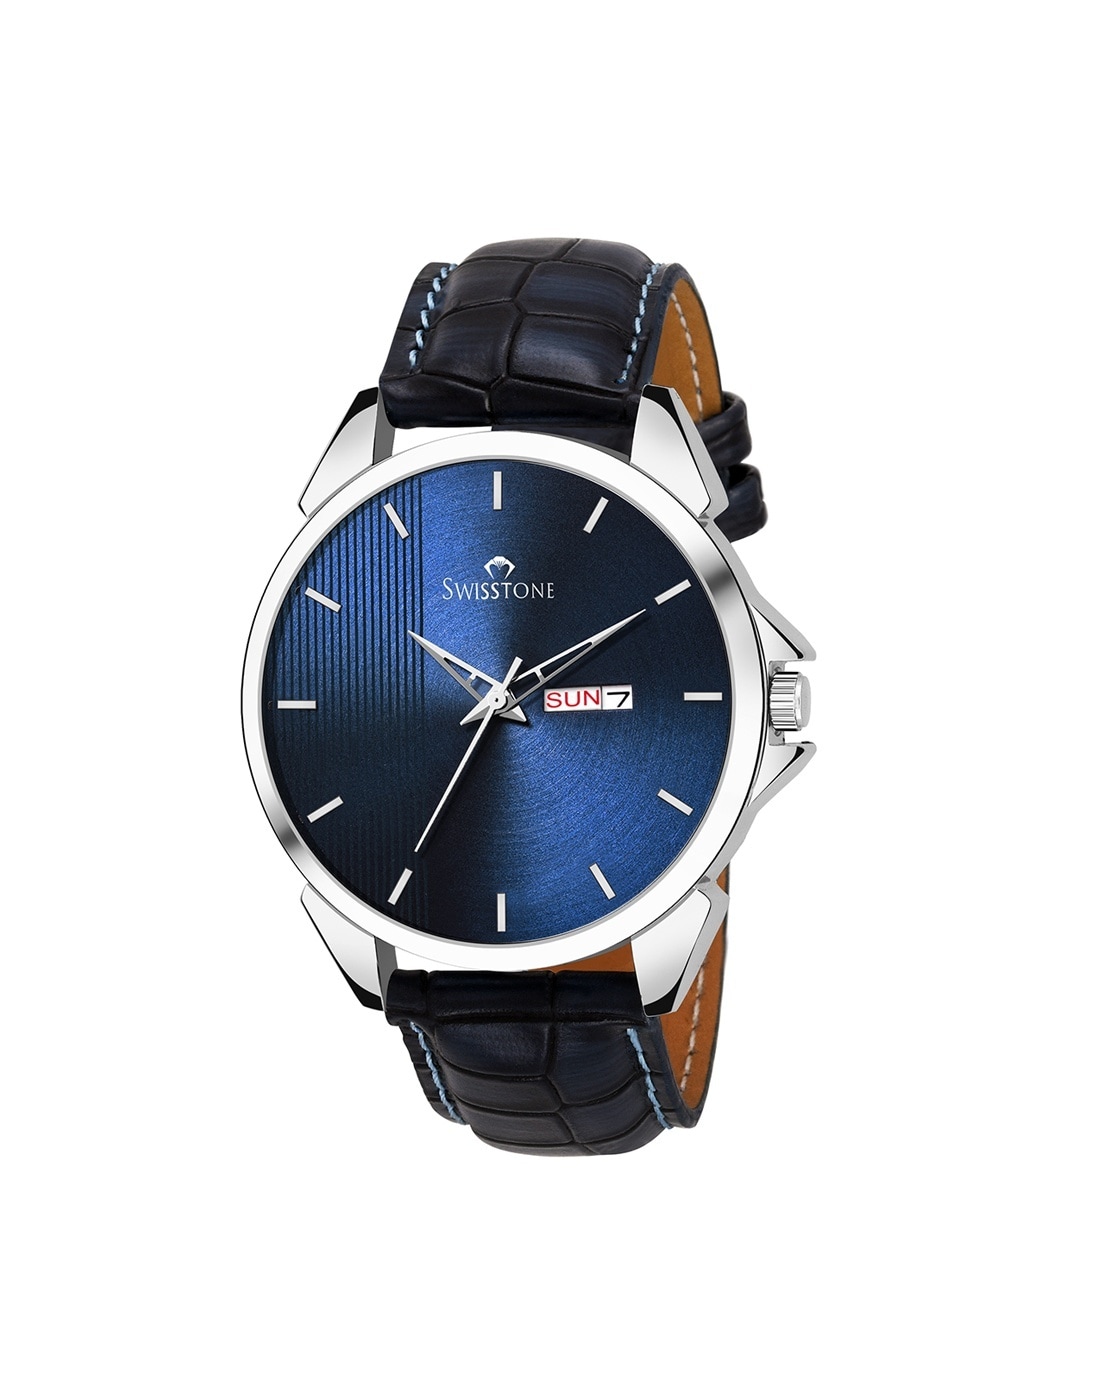 SWISSTONE Analog Women's Watch (Blue Dial Silver Colored Strap). | Silver  watches women, Womens watches, Unique wrist watch